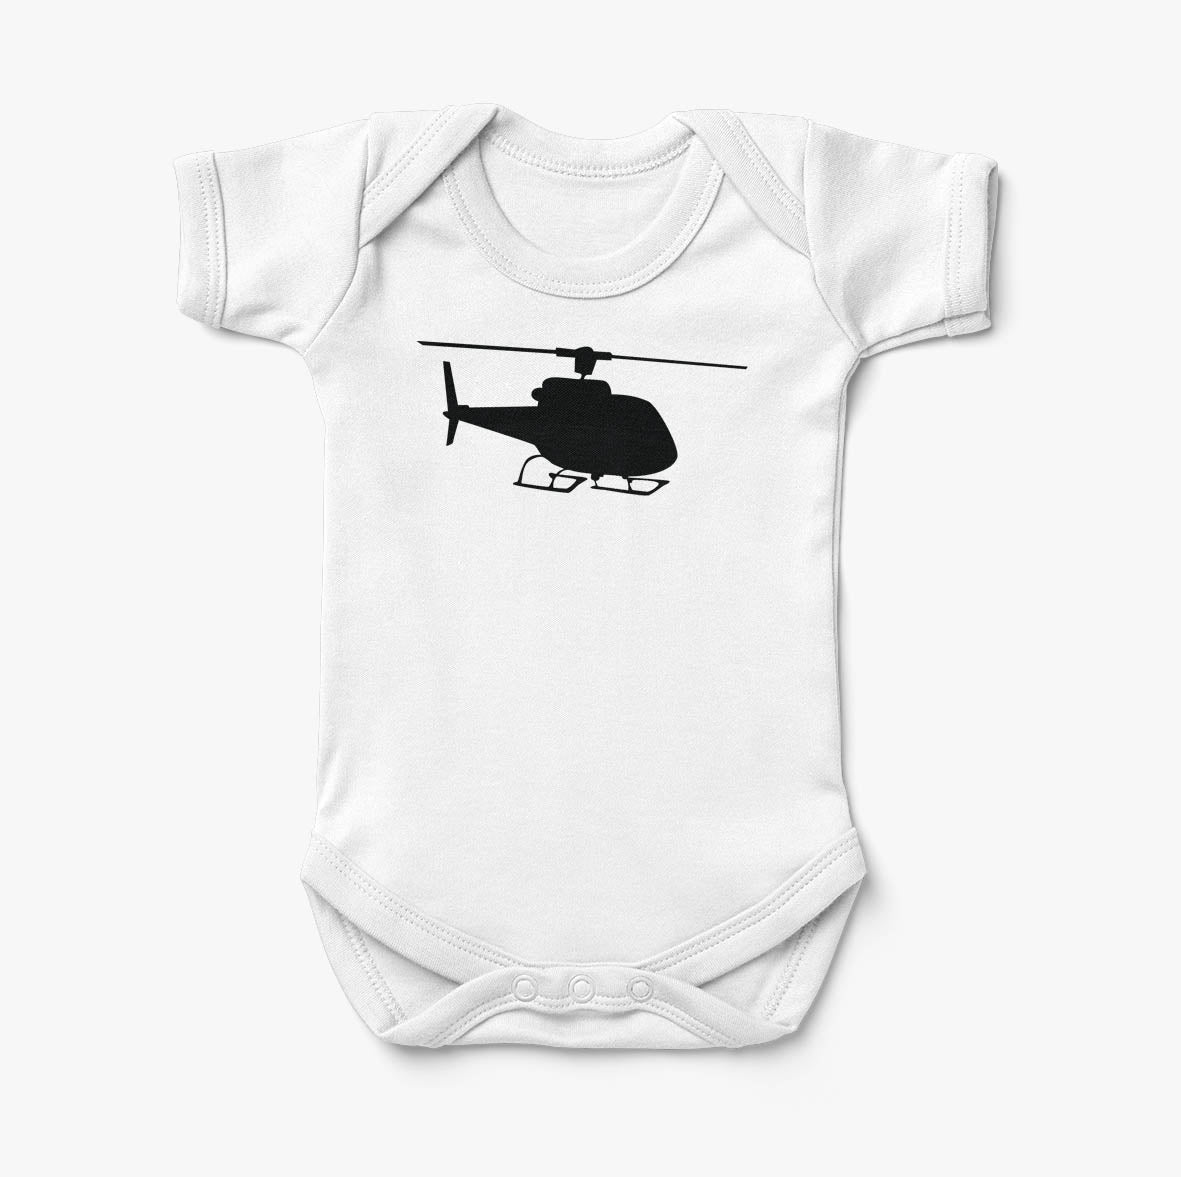 Helicopter Silhouette Designed Baby Bodysuits